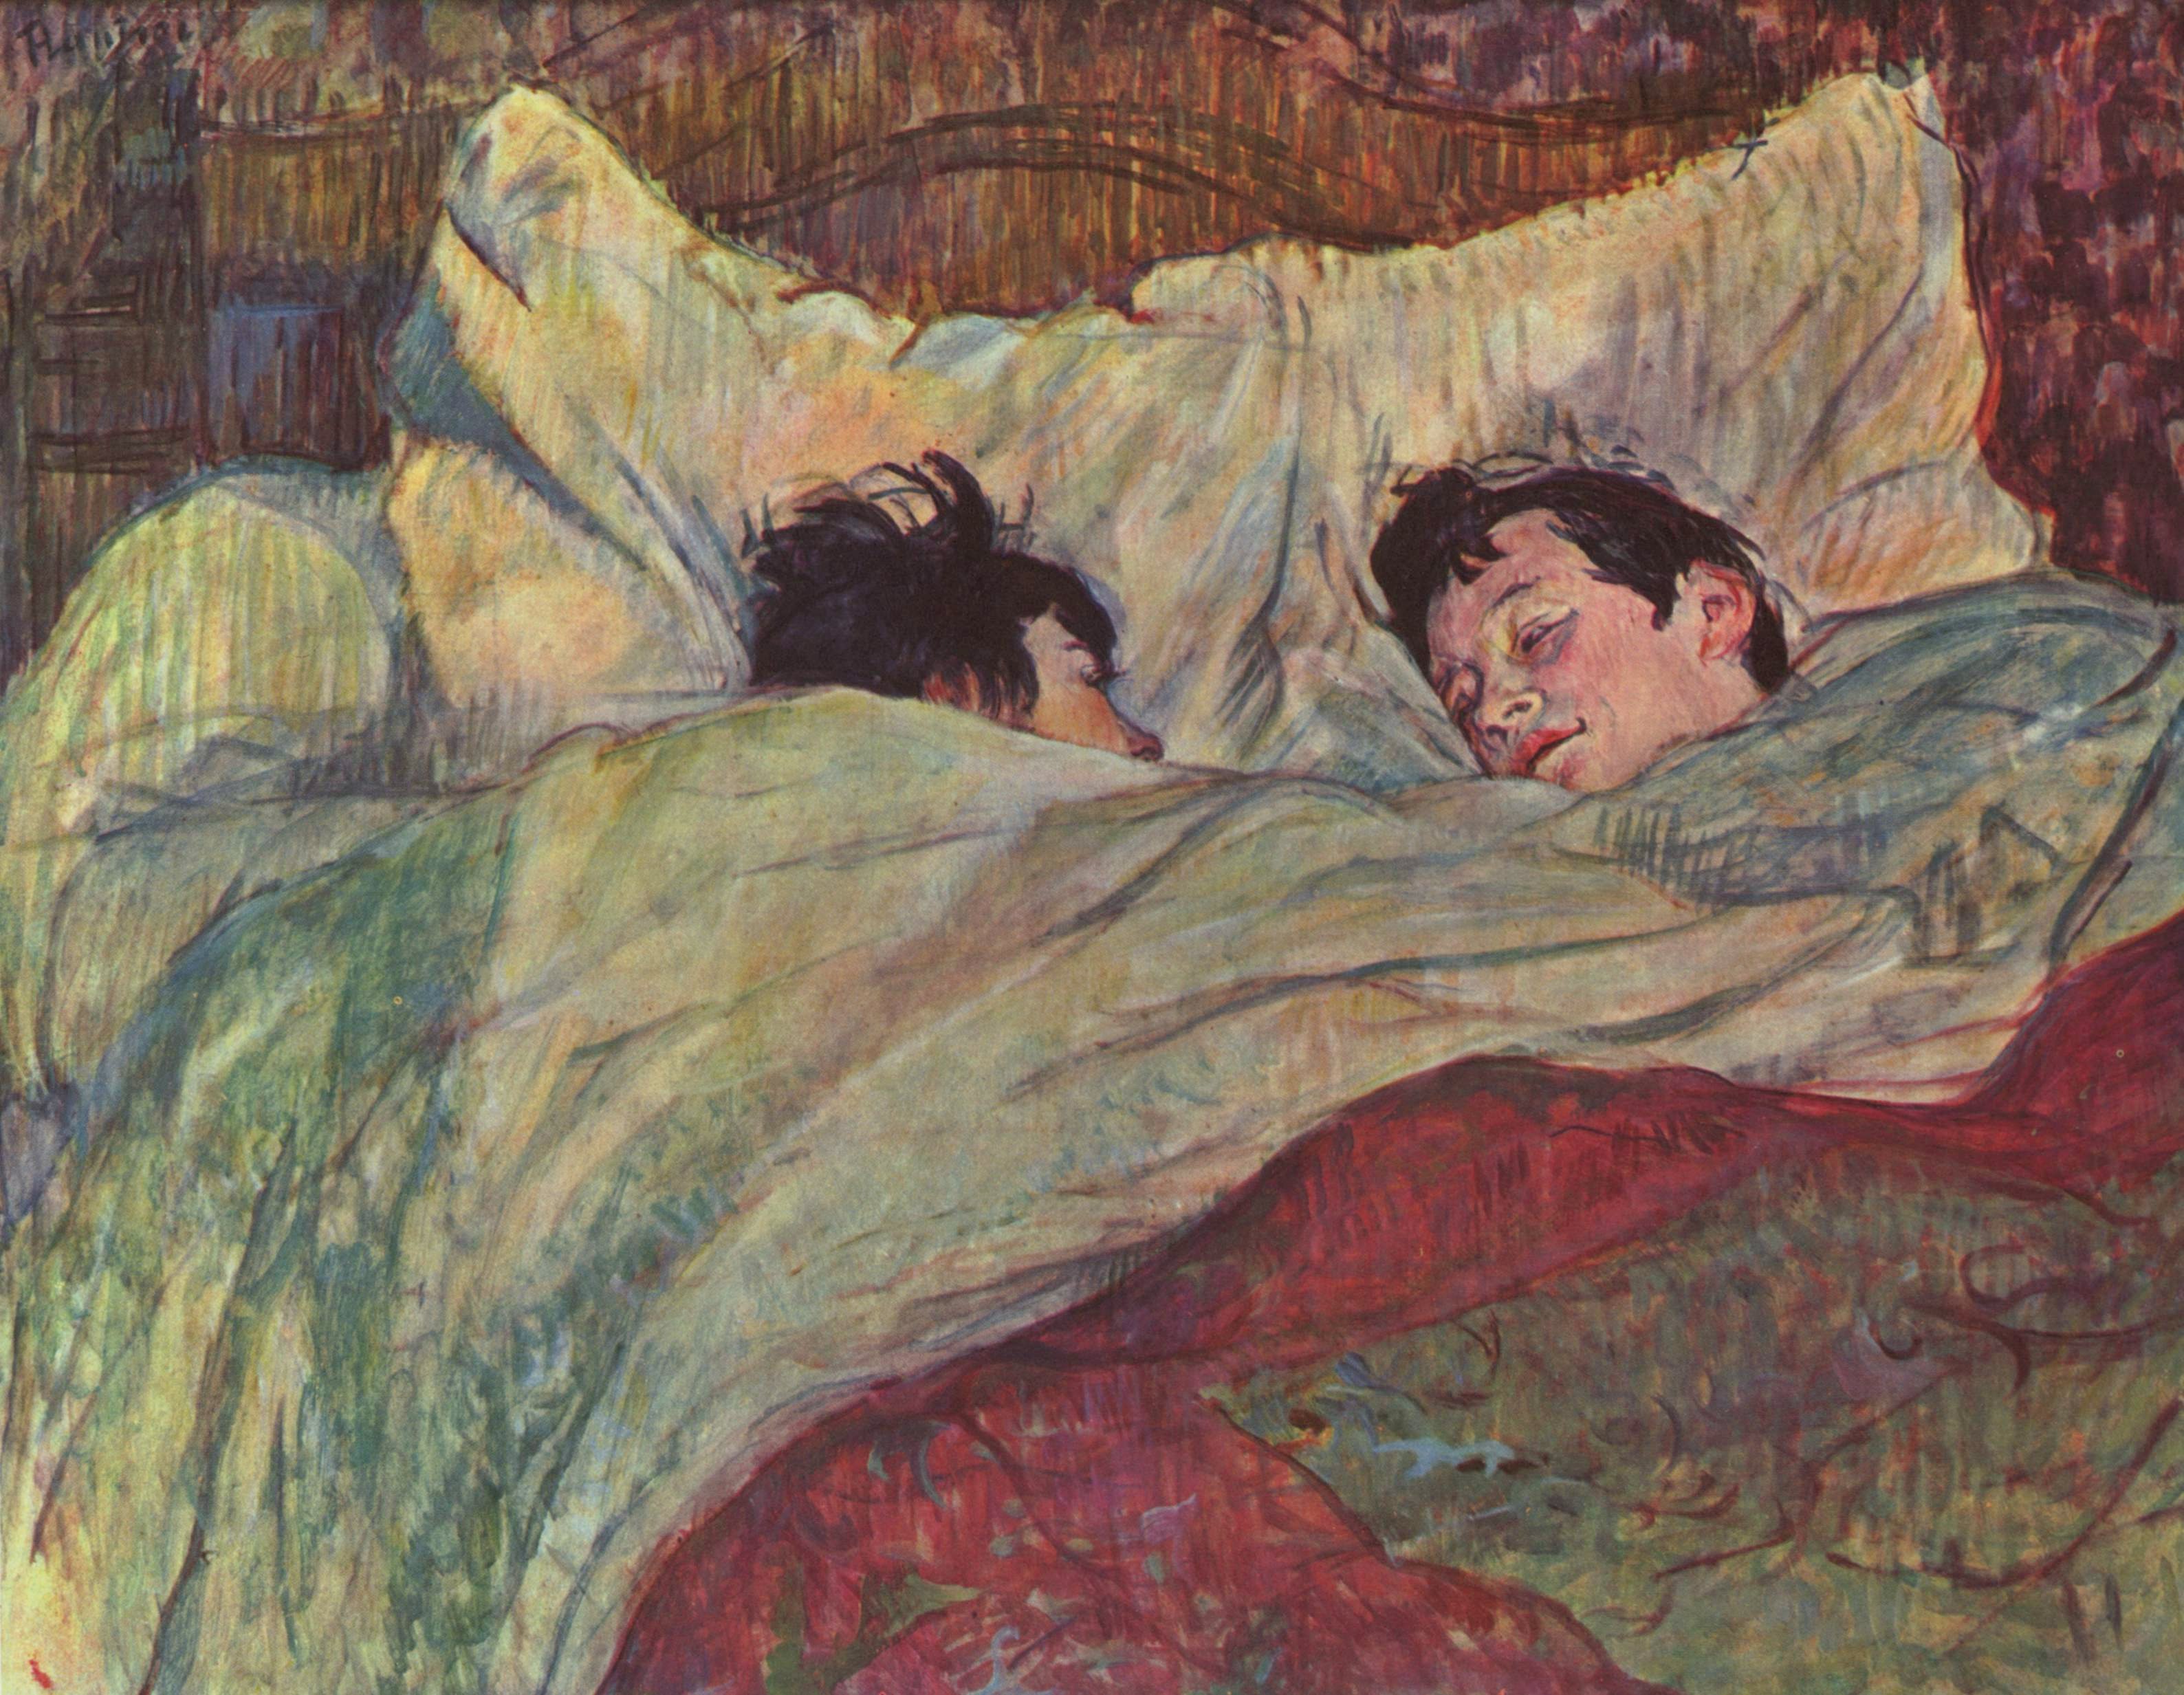 LYING ON A YELLOW BED by Henri Toulouse Lautrec Matt/Glossy/Canvas Paper A4/A3 